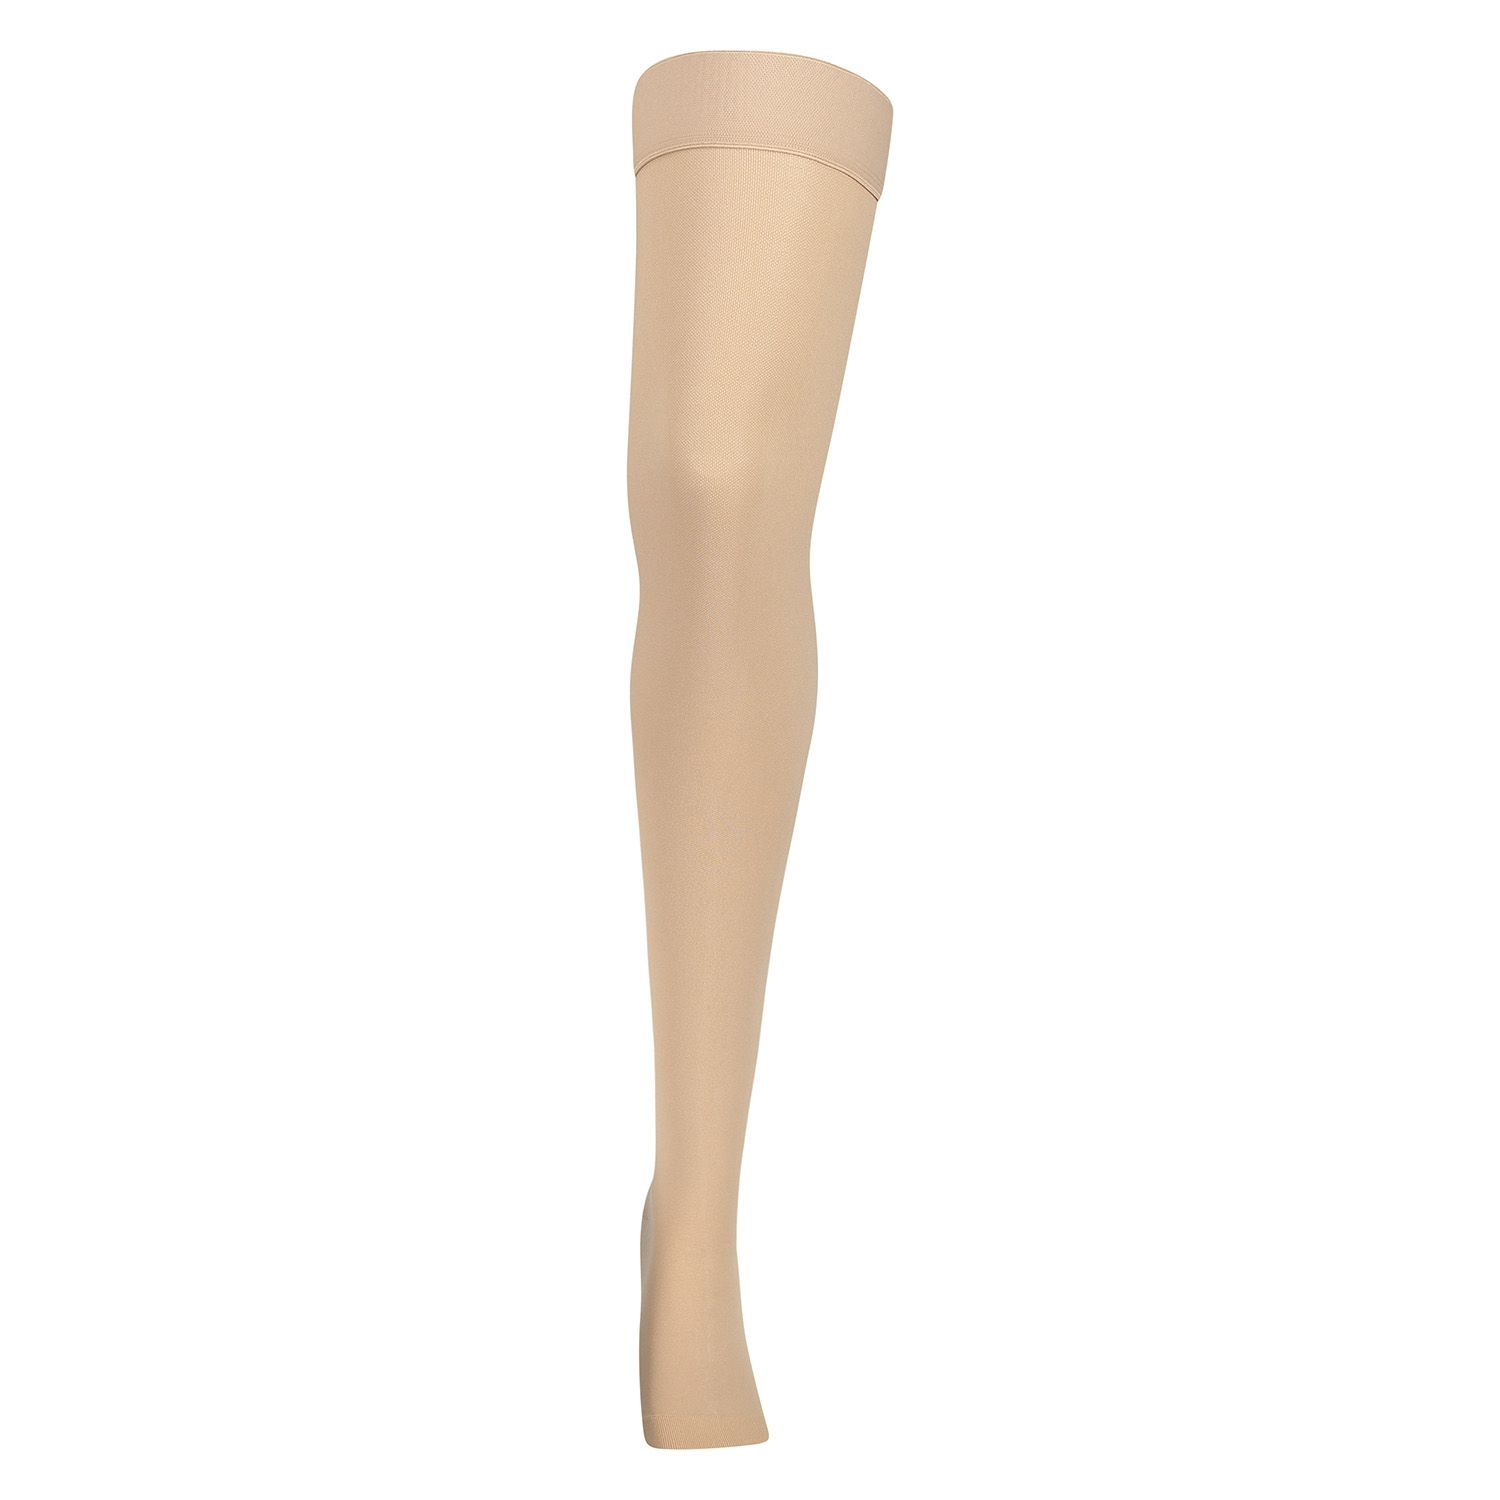 dunimed premium comfort compression stockings groin length open toe